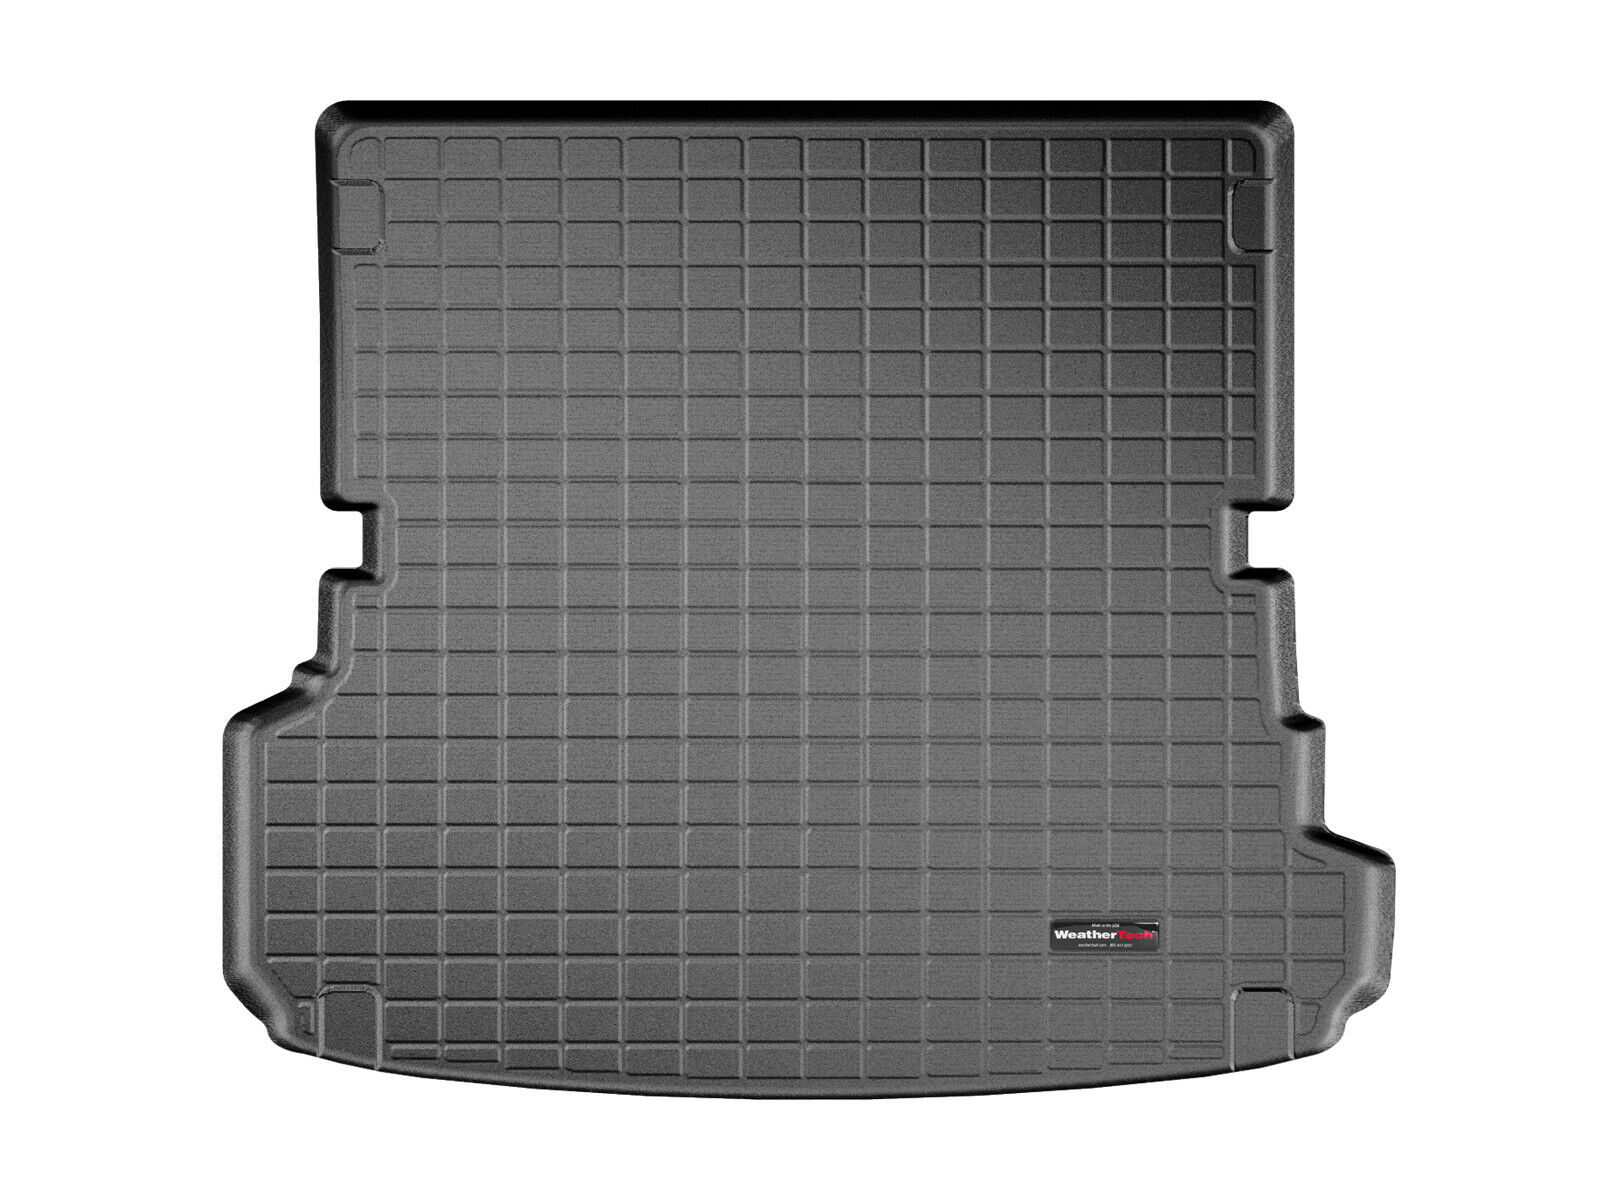 WeatherTech Cargo Trunk Liner for Audi Q7, Audi SQ7 - Behind 2nd Row, Black